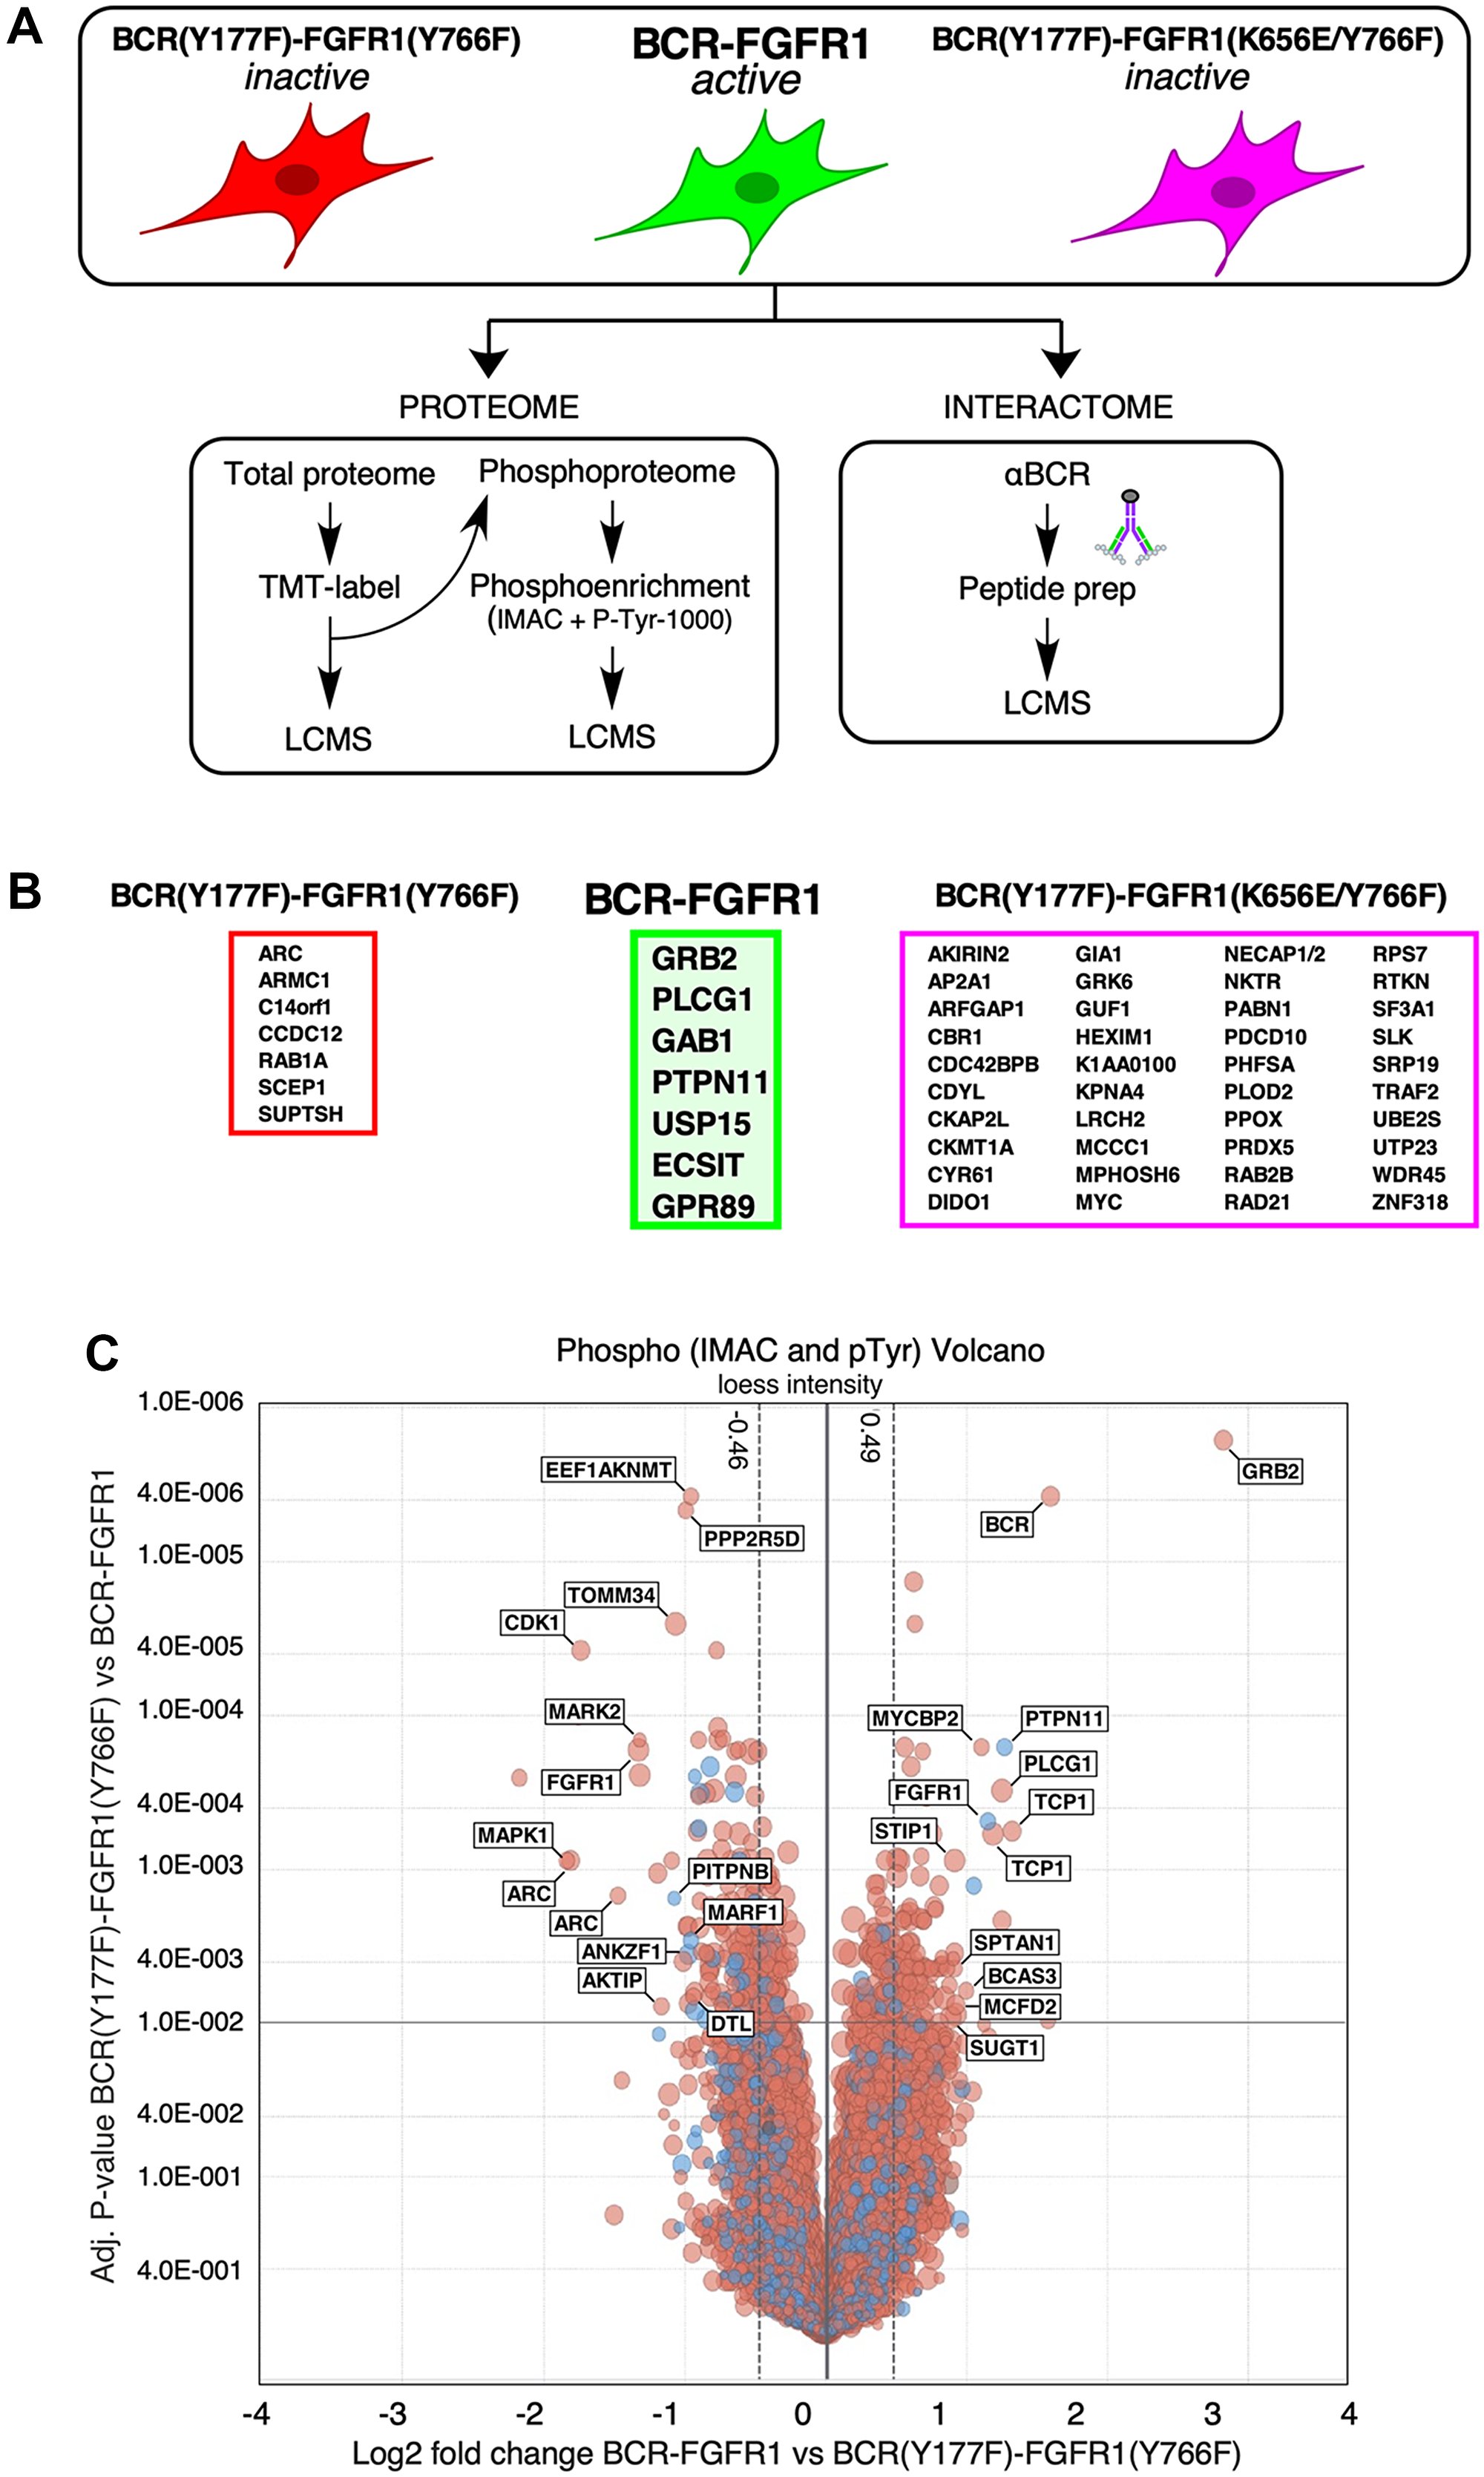 LC-MS/MS determination of the protein interactome and phospho-proteome of BCR-FGFR1 and its inactive derivatives.